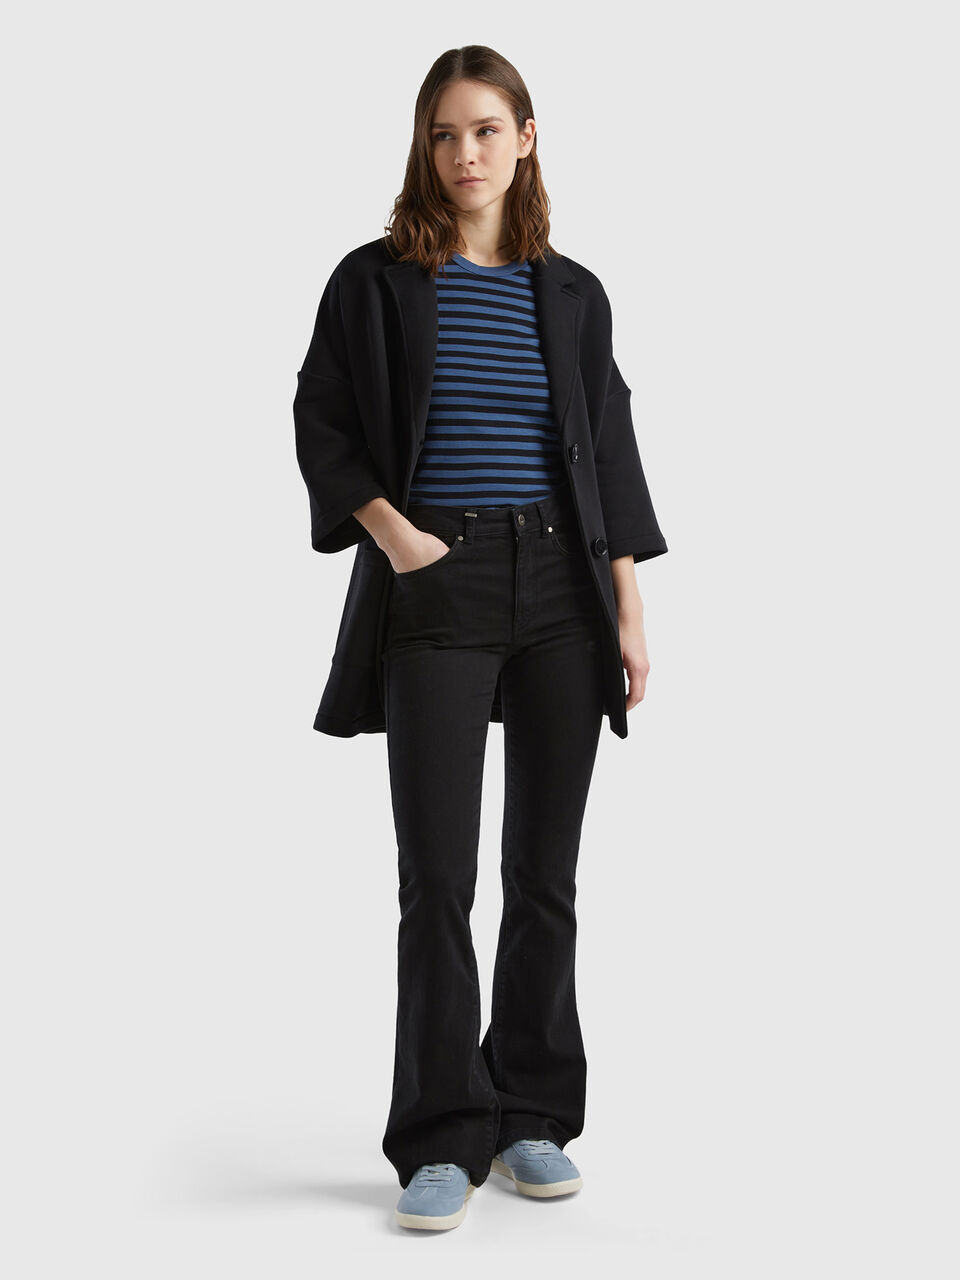 Benetton Stretch Trousers & Jeans for Women